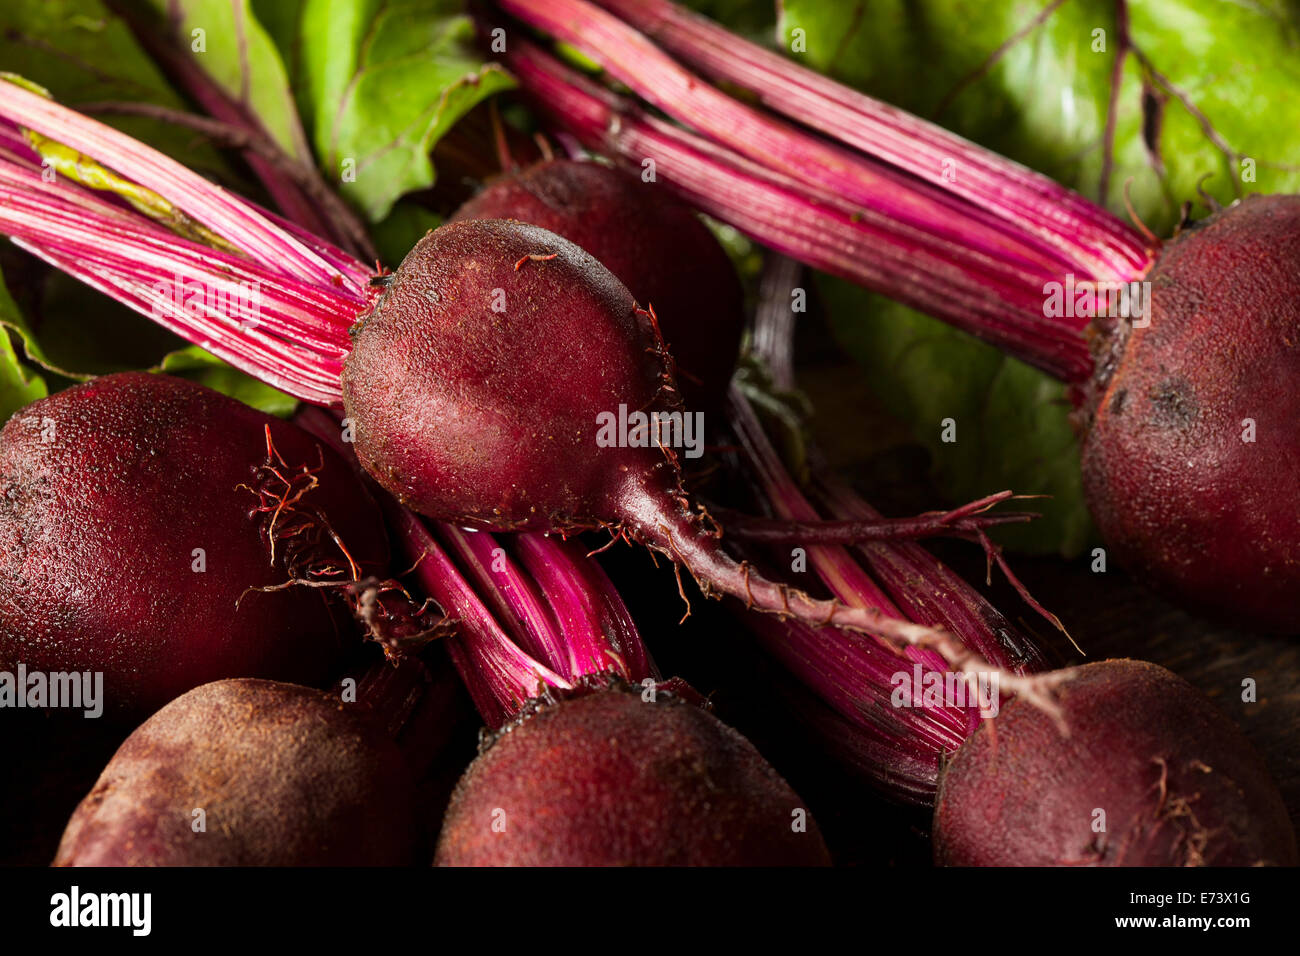 Raw Organic Red Beets Ready To Eat Stock Photo